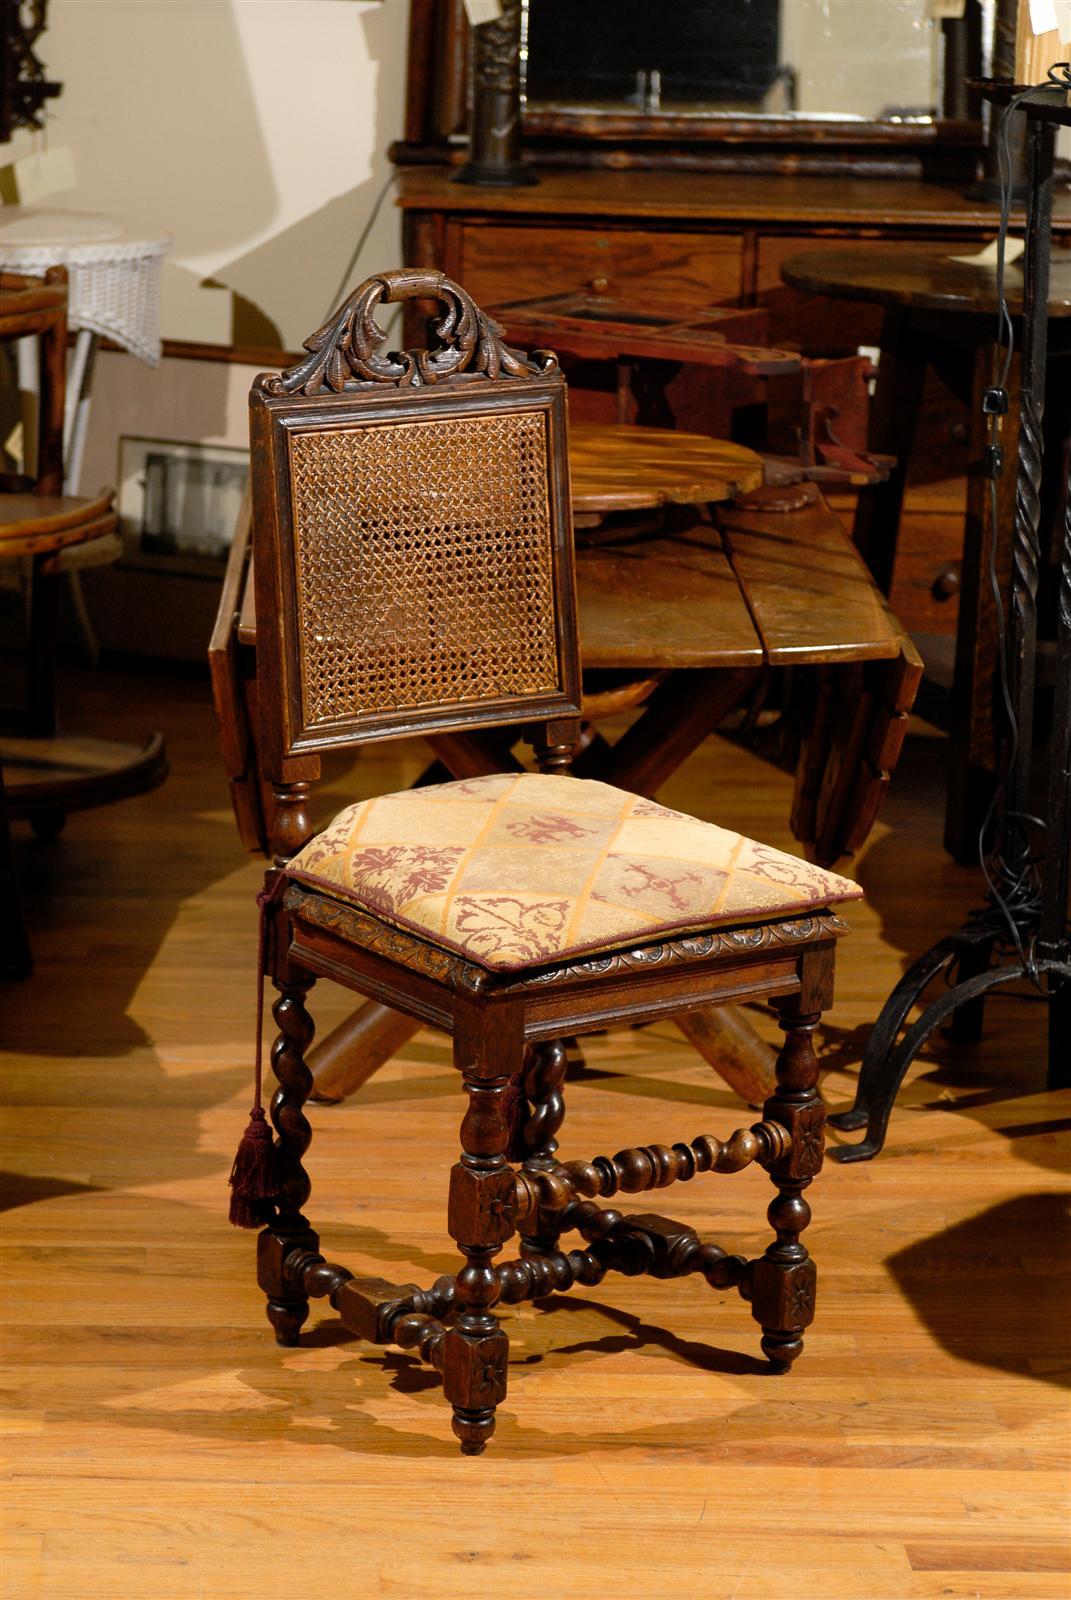 This wonderful side chair with caned seat and back would look lovely in a living room or bedroom.   The cane is beautifully woven and in excellent condition.  This would also look very nice as a chair by a table in an entrance hall.